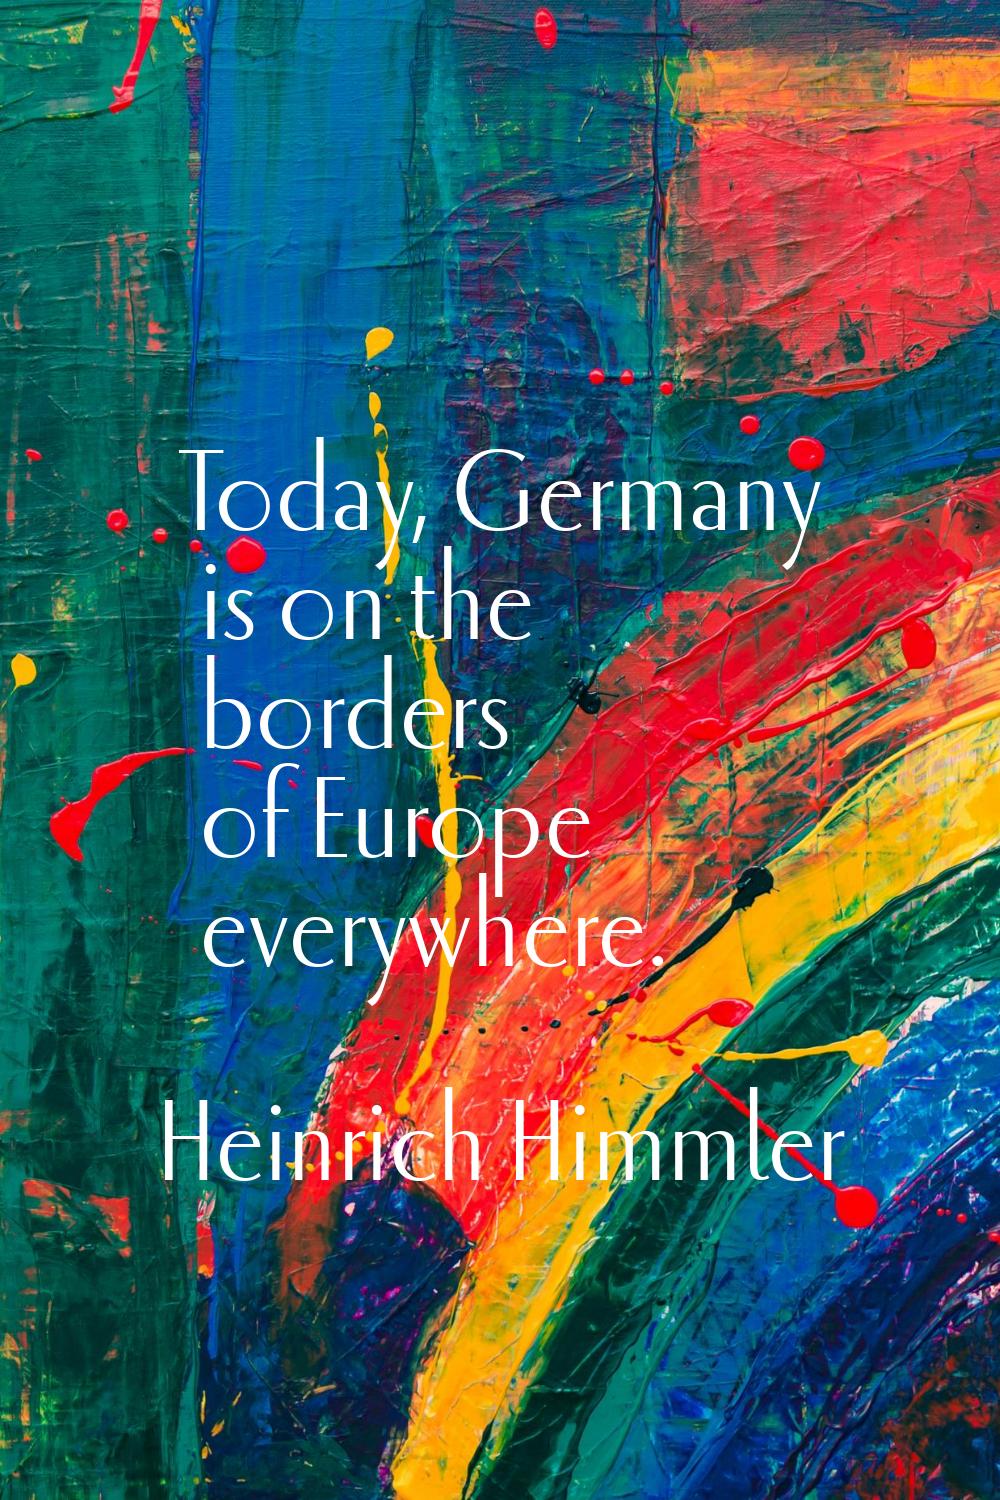 Today, Germany is on the borders of Europe everywhere.